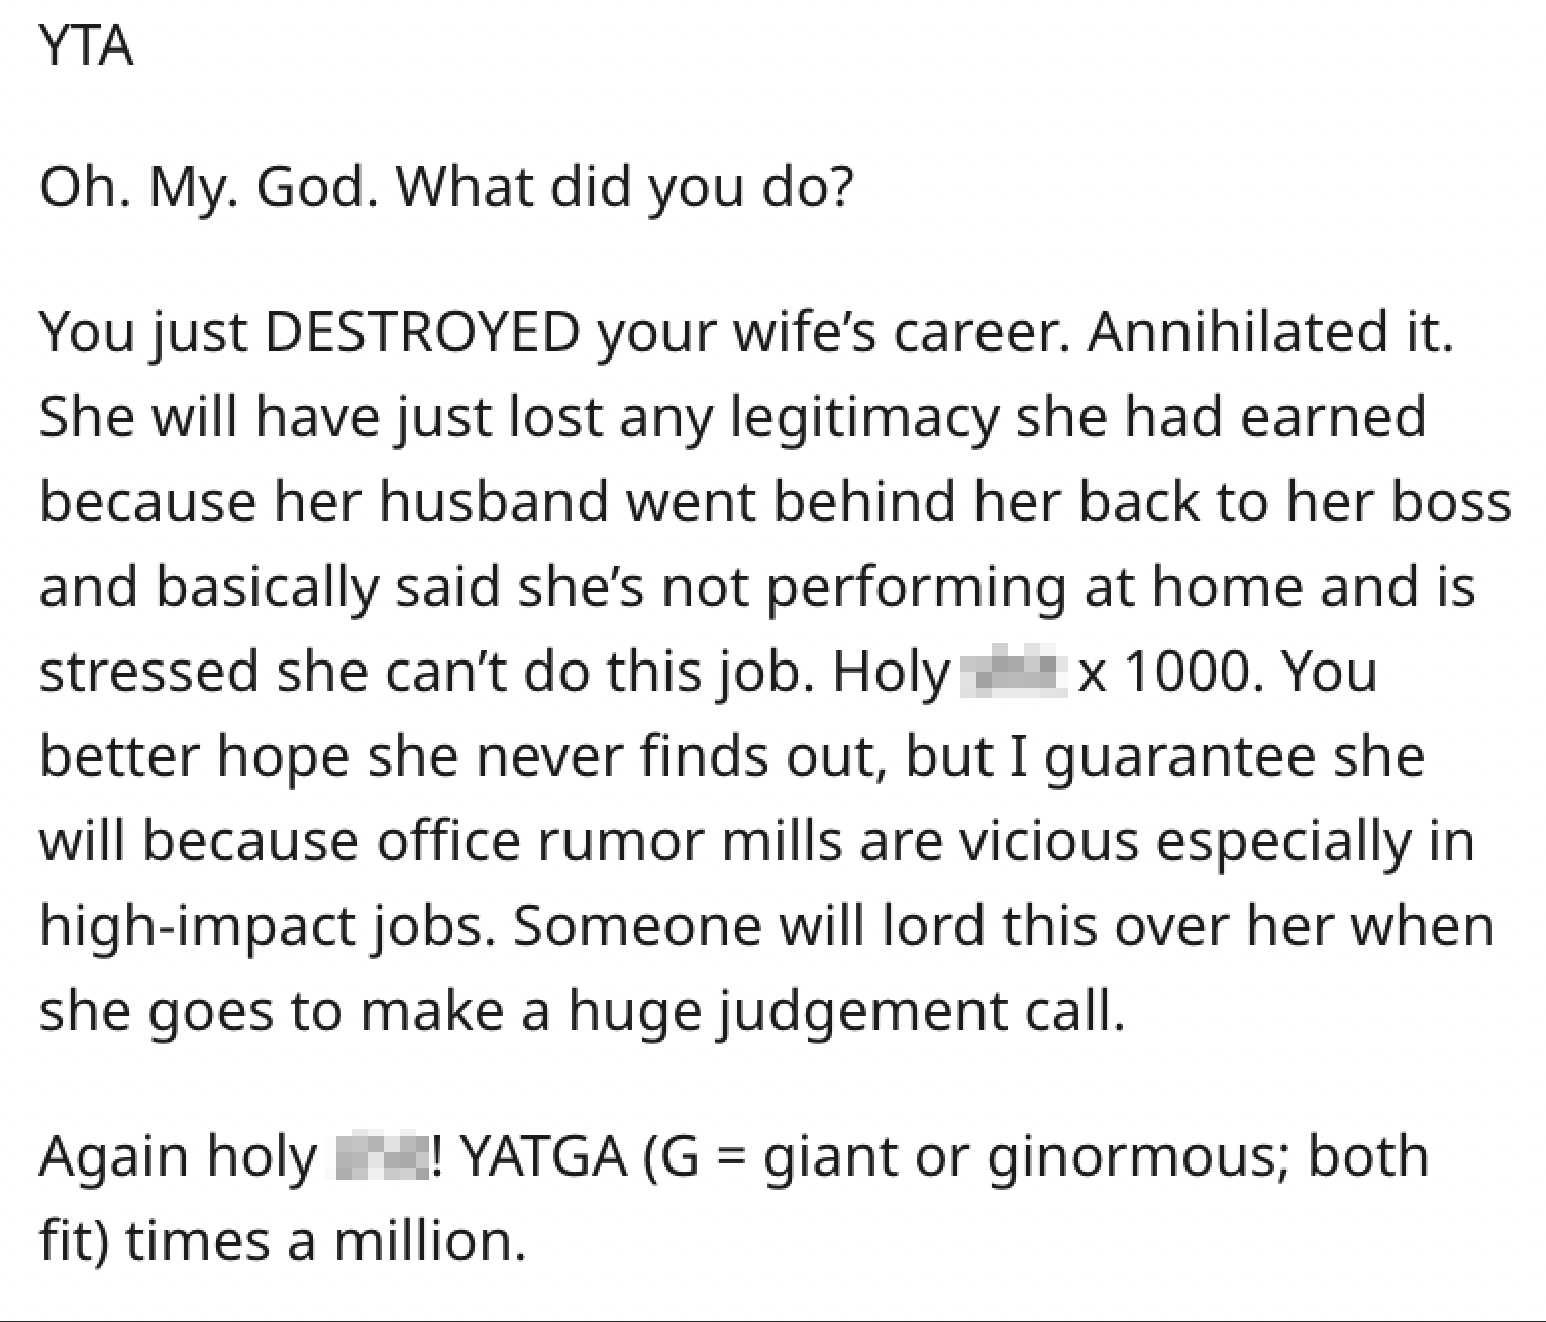 Yta Oh. My. God. What did you do? You just Destroyed your wife's career. Annihilated it. She will have just lost any legitimacy she had earned because her husband went behind her back to her boss and basically said she's not performing at home and is…